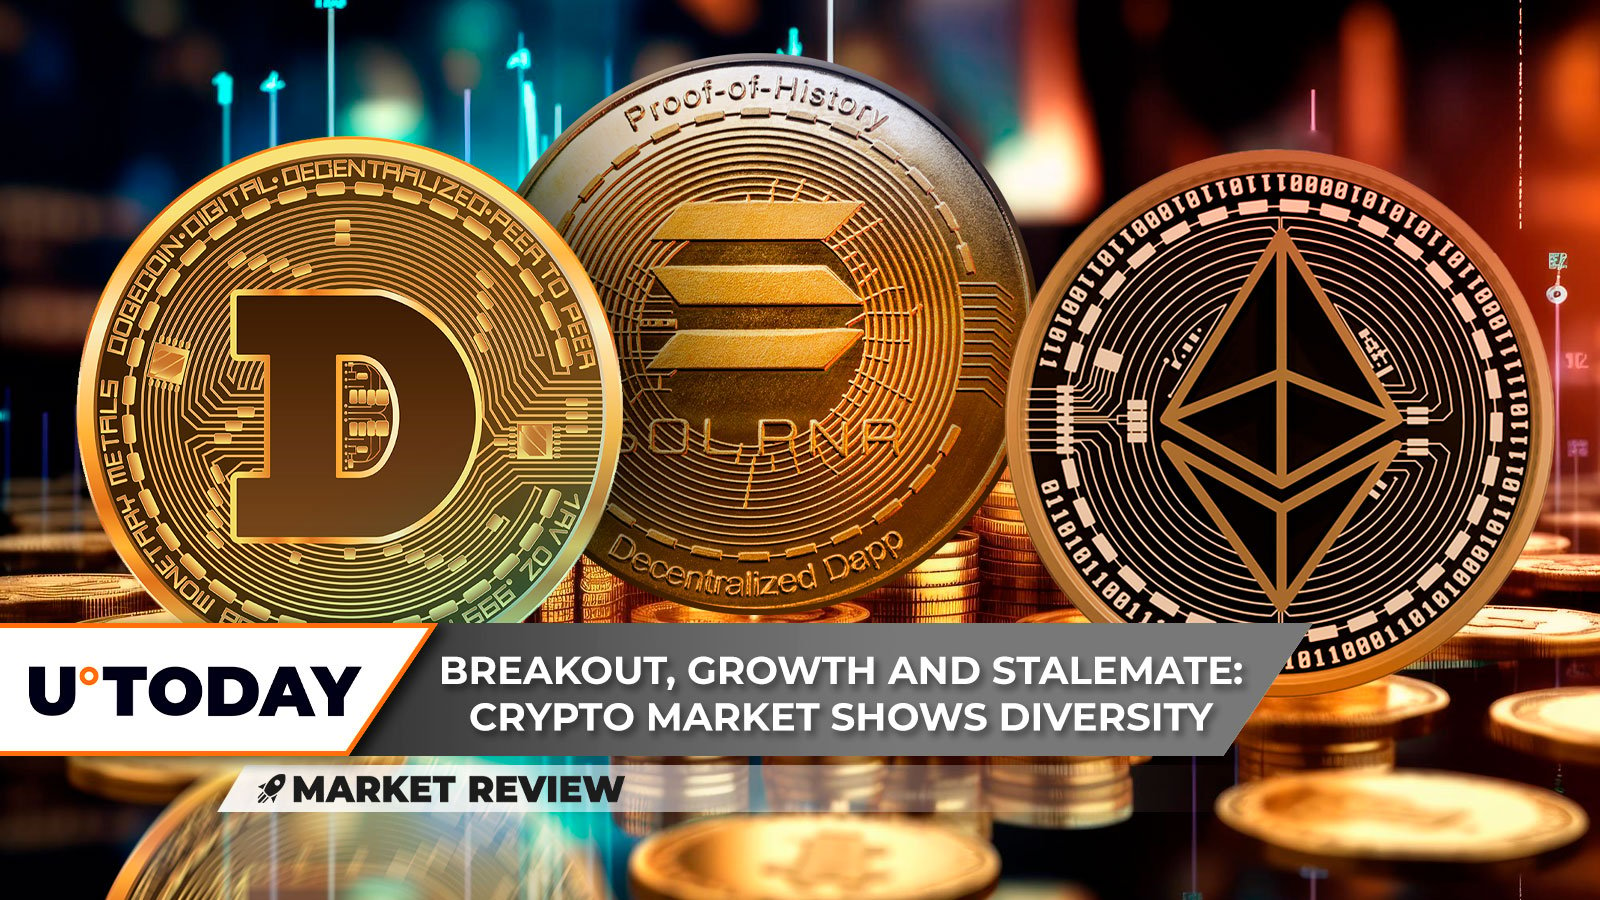 Dogecoin (DOGE) Breakout Occurs, What’s Next? Solana (SOL) Stays Dominant, Will Ethereum (ETH) Survive Unseen Stalemate?